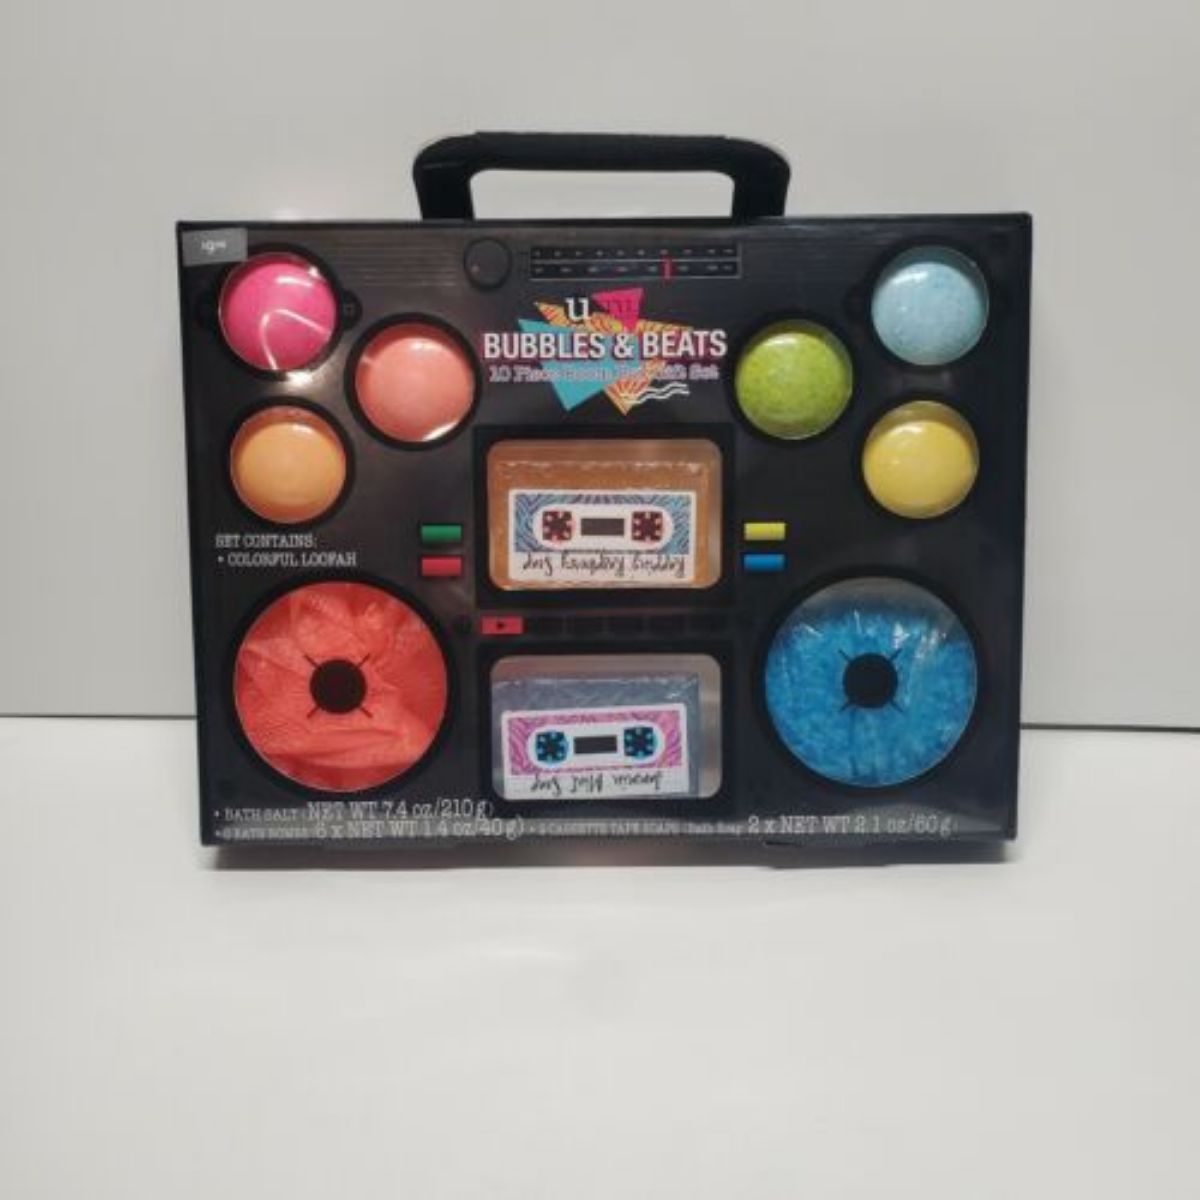 33. Musical Bath Bombs Set: A Unique and Relaxing 1 Year Anniversary Gift for Husband